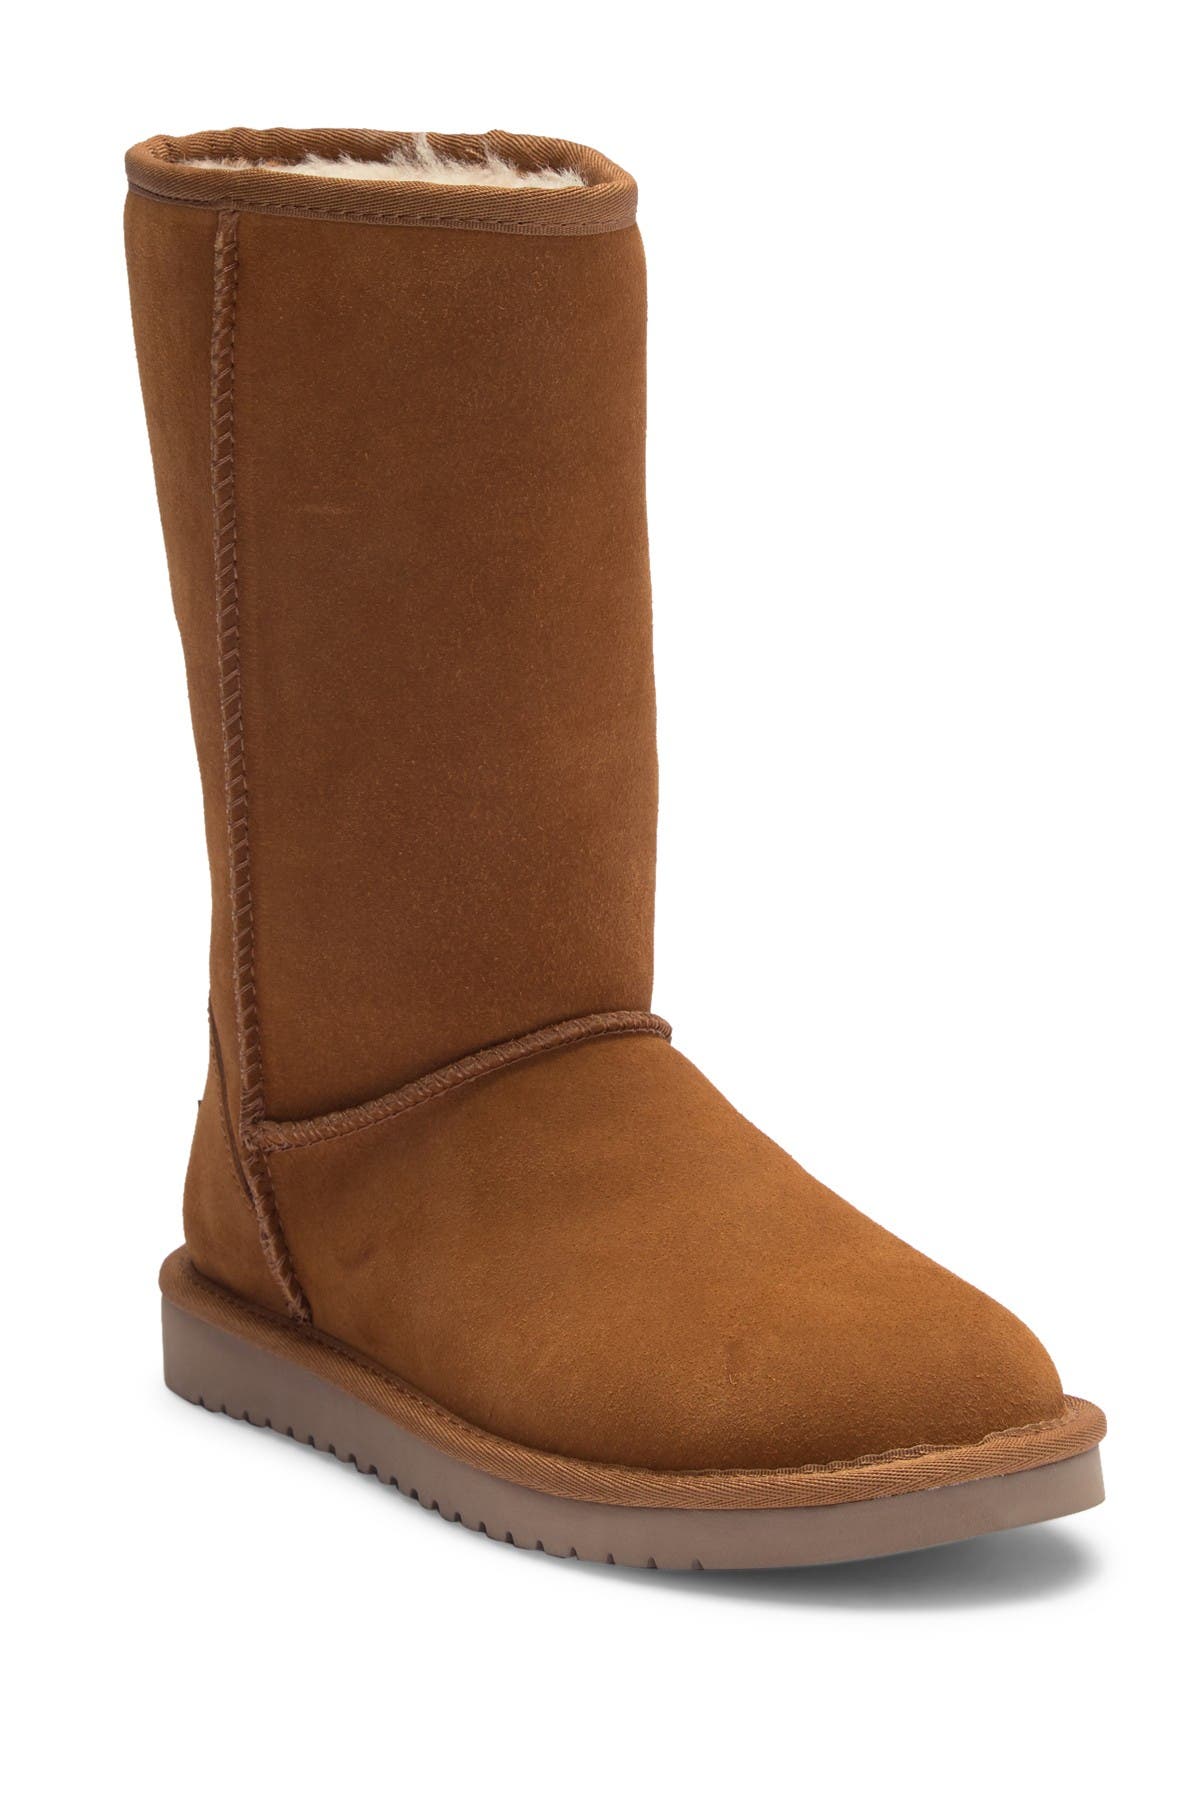 ugg boots for women shearling trim boot